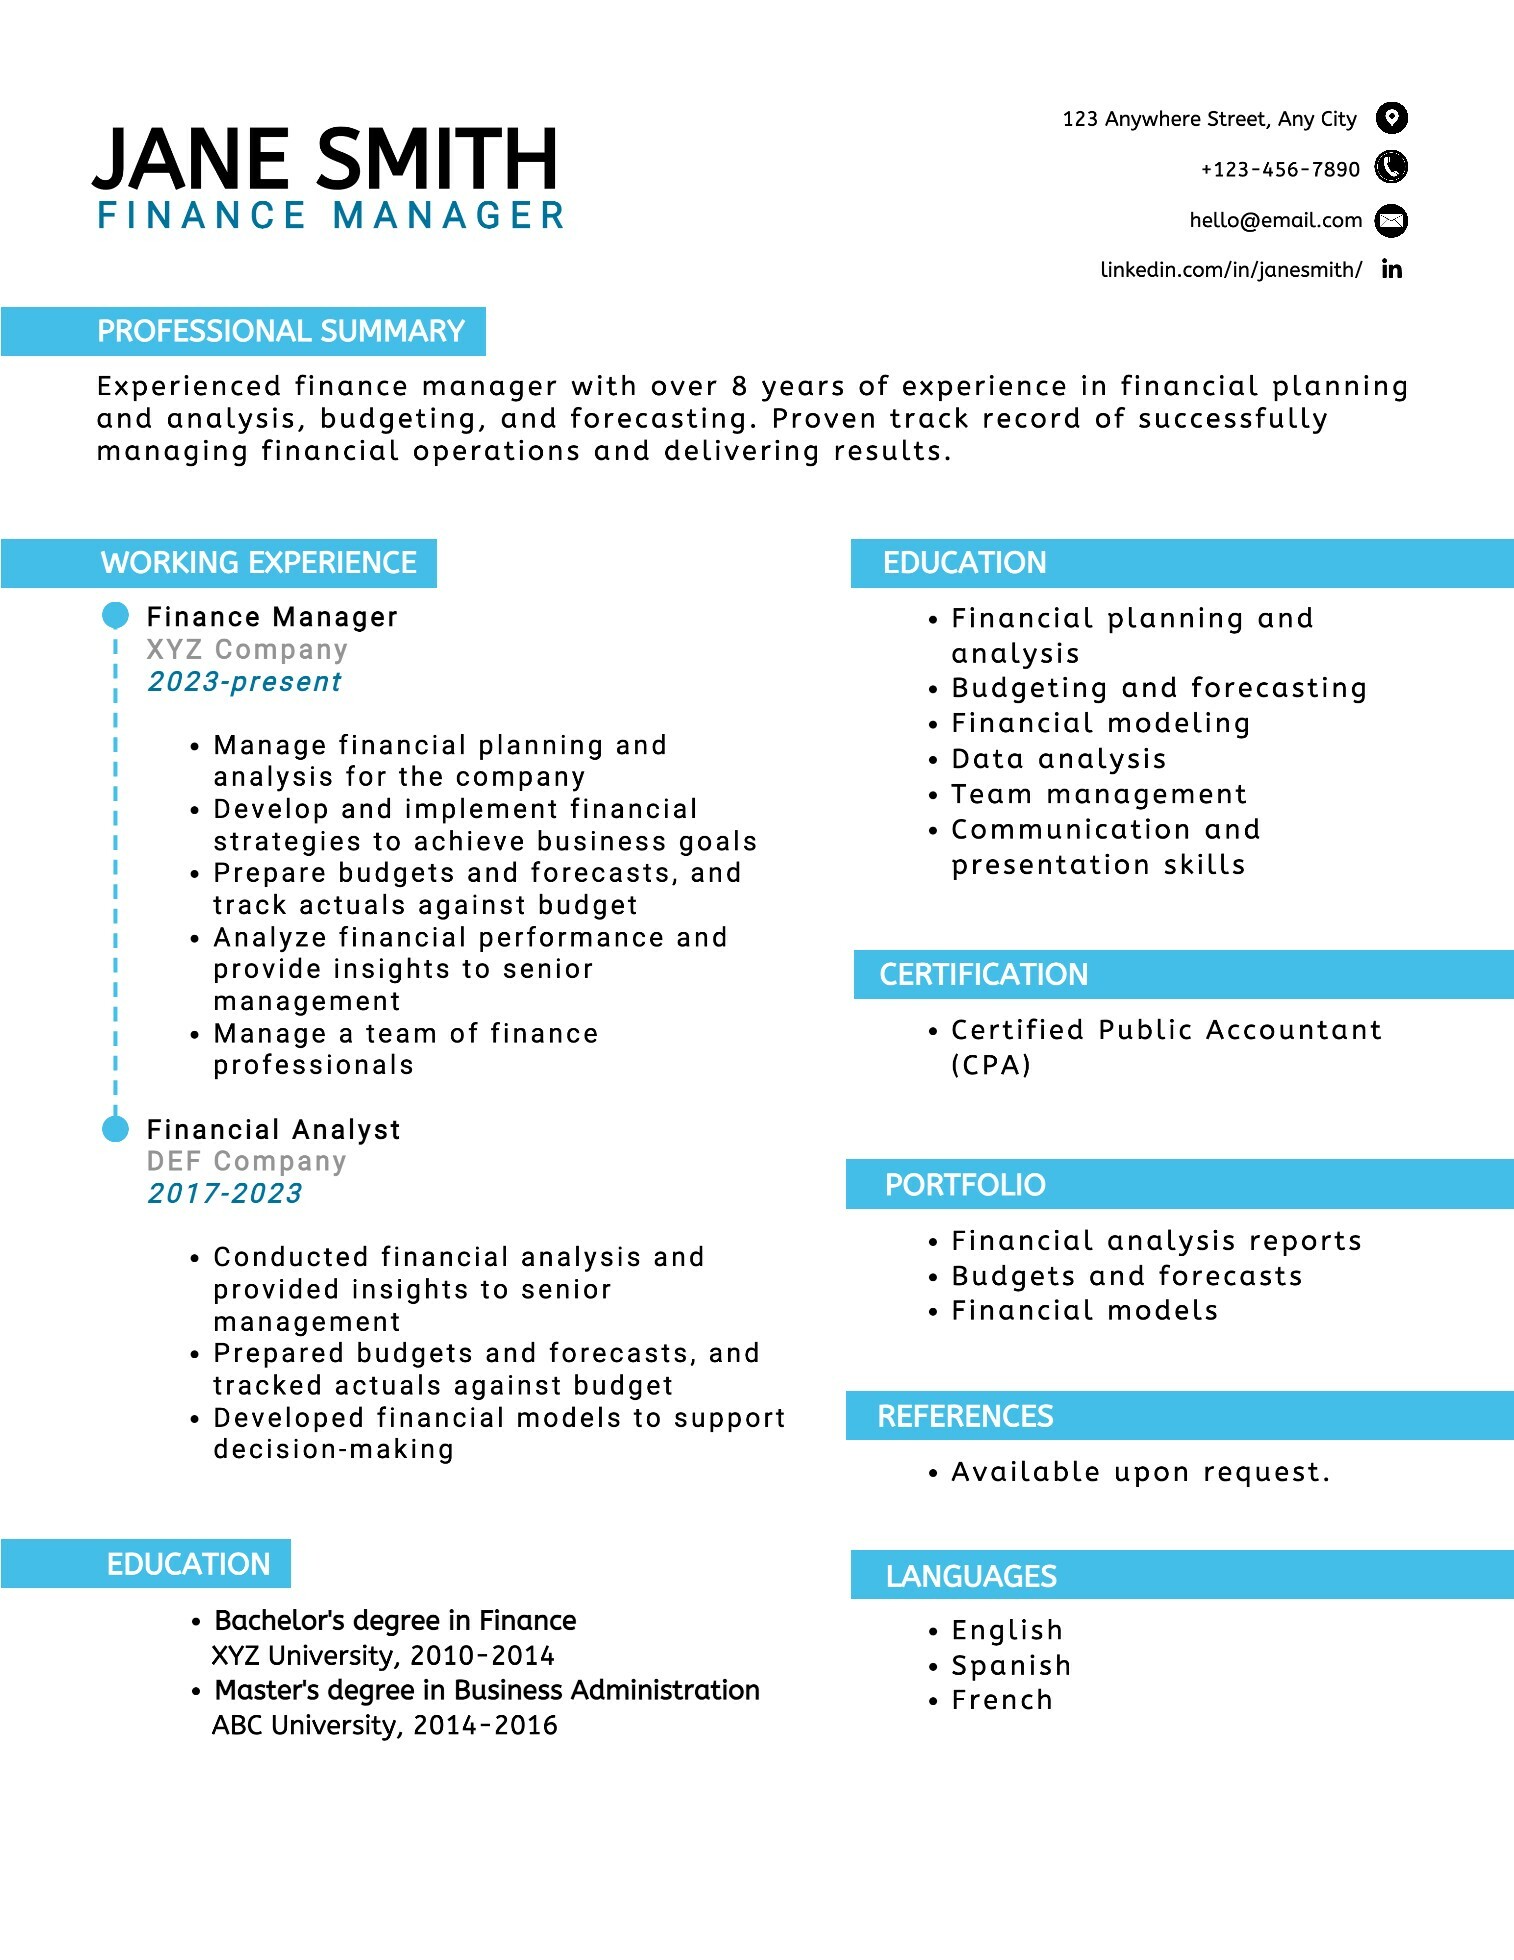 Creative Business - Resume ATS Friendly